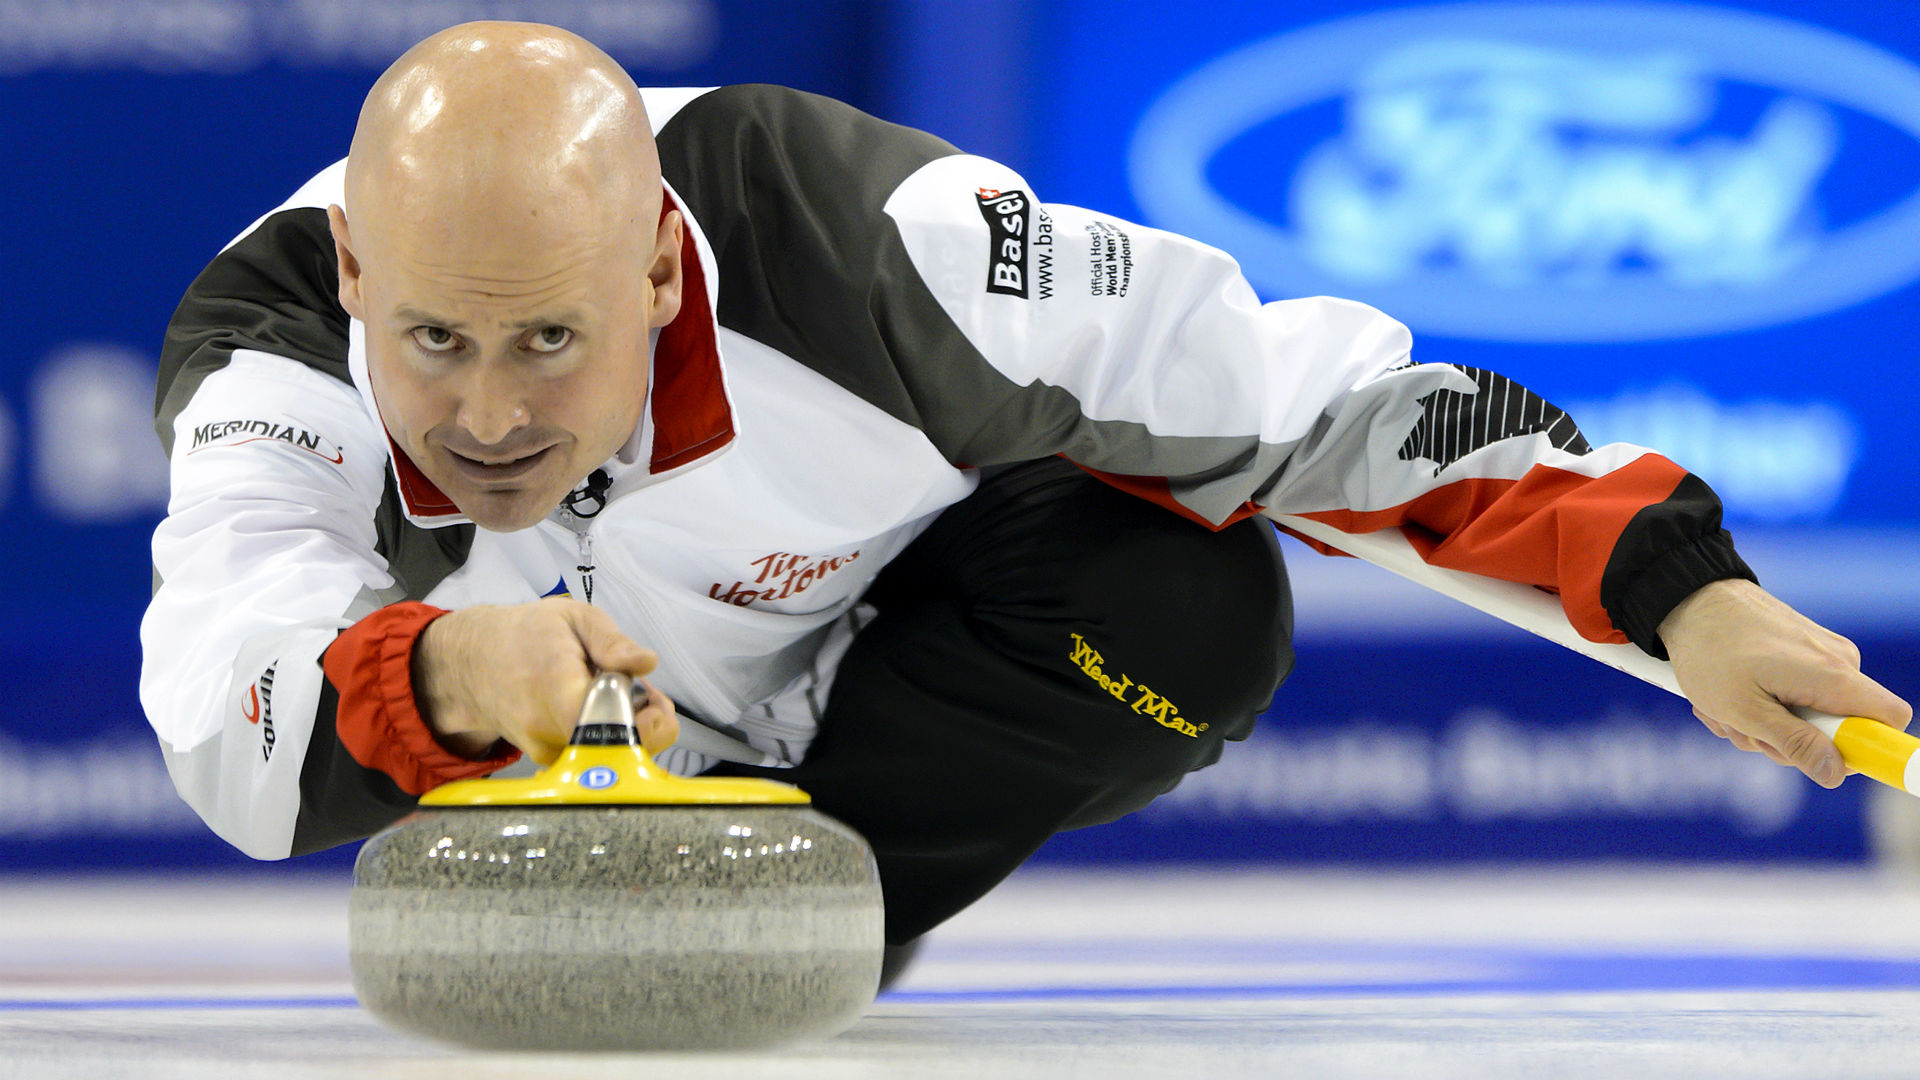 curling-at-the-2018-winter-olympics-full-schedule-medal-contenders